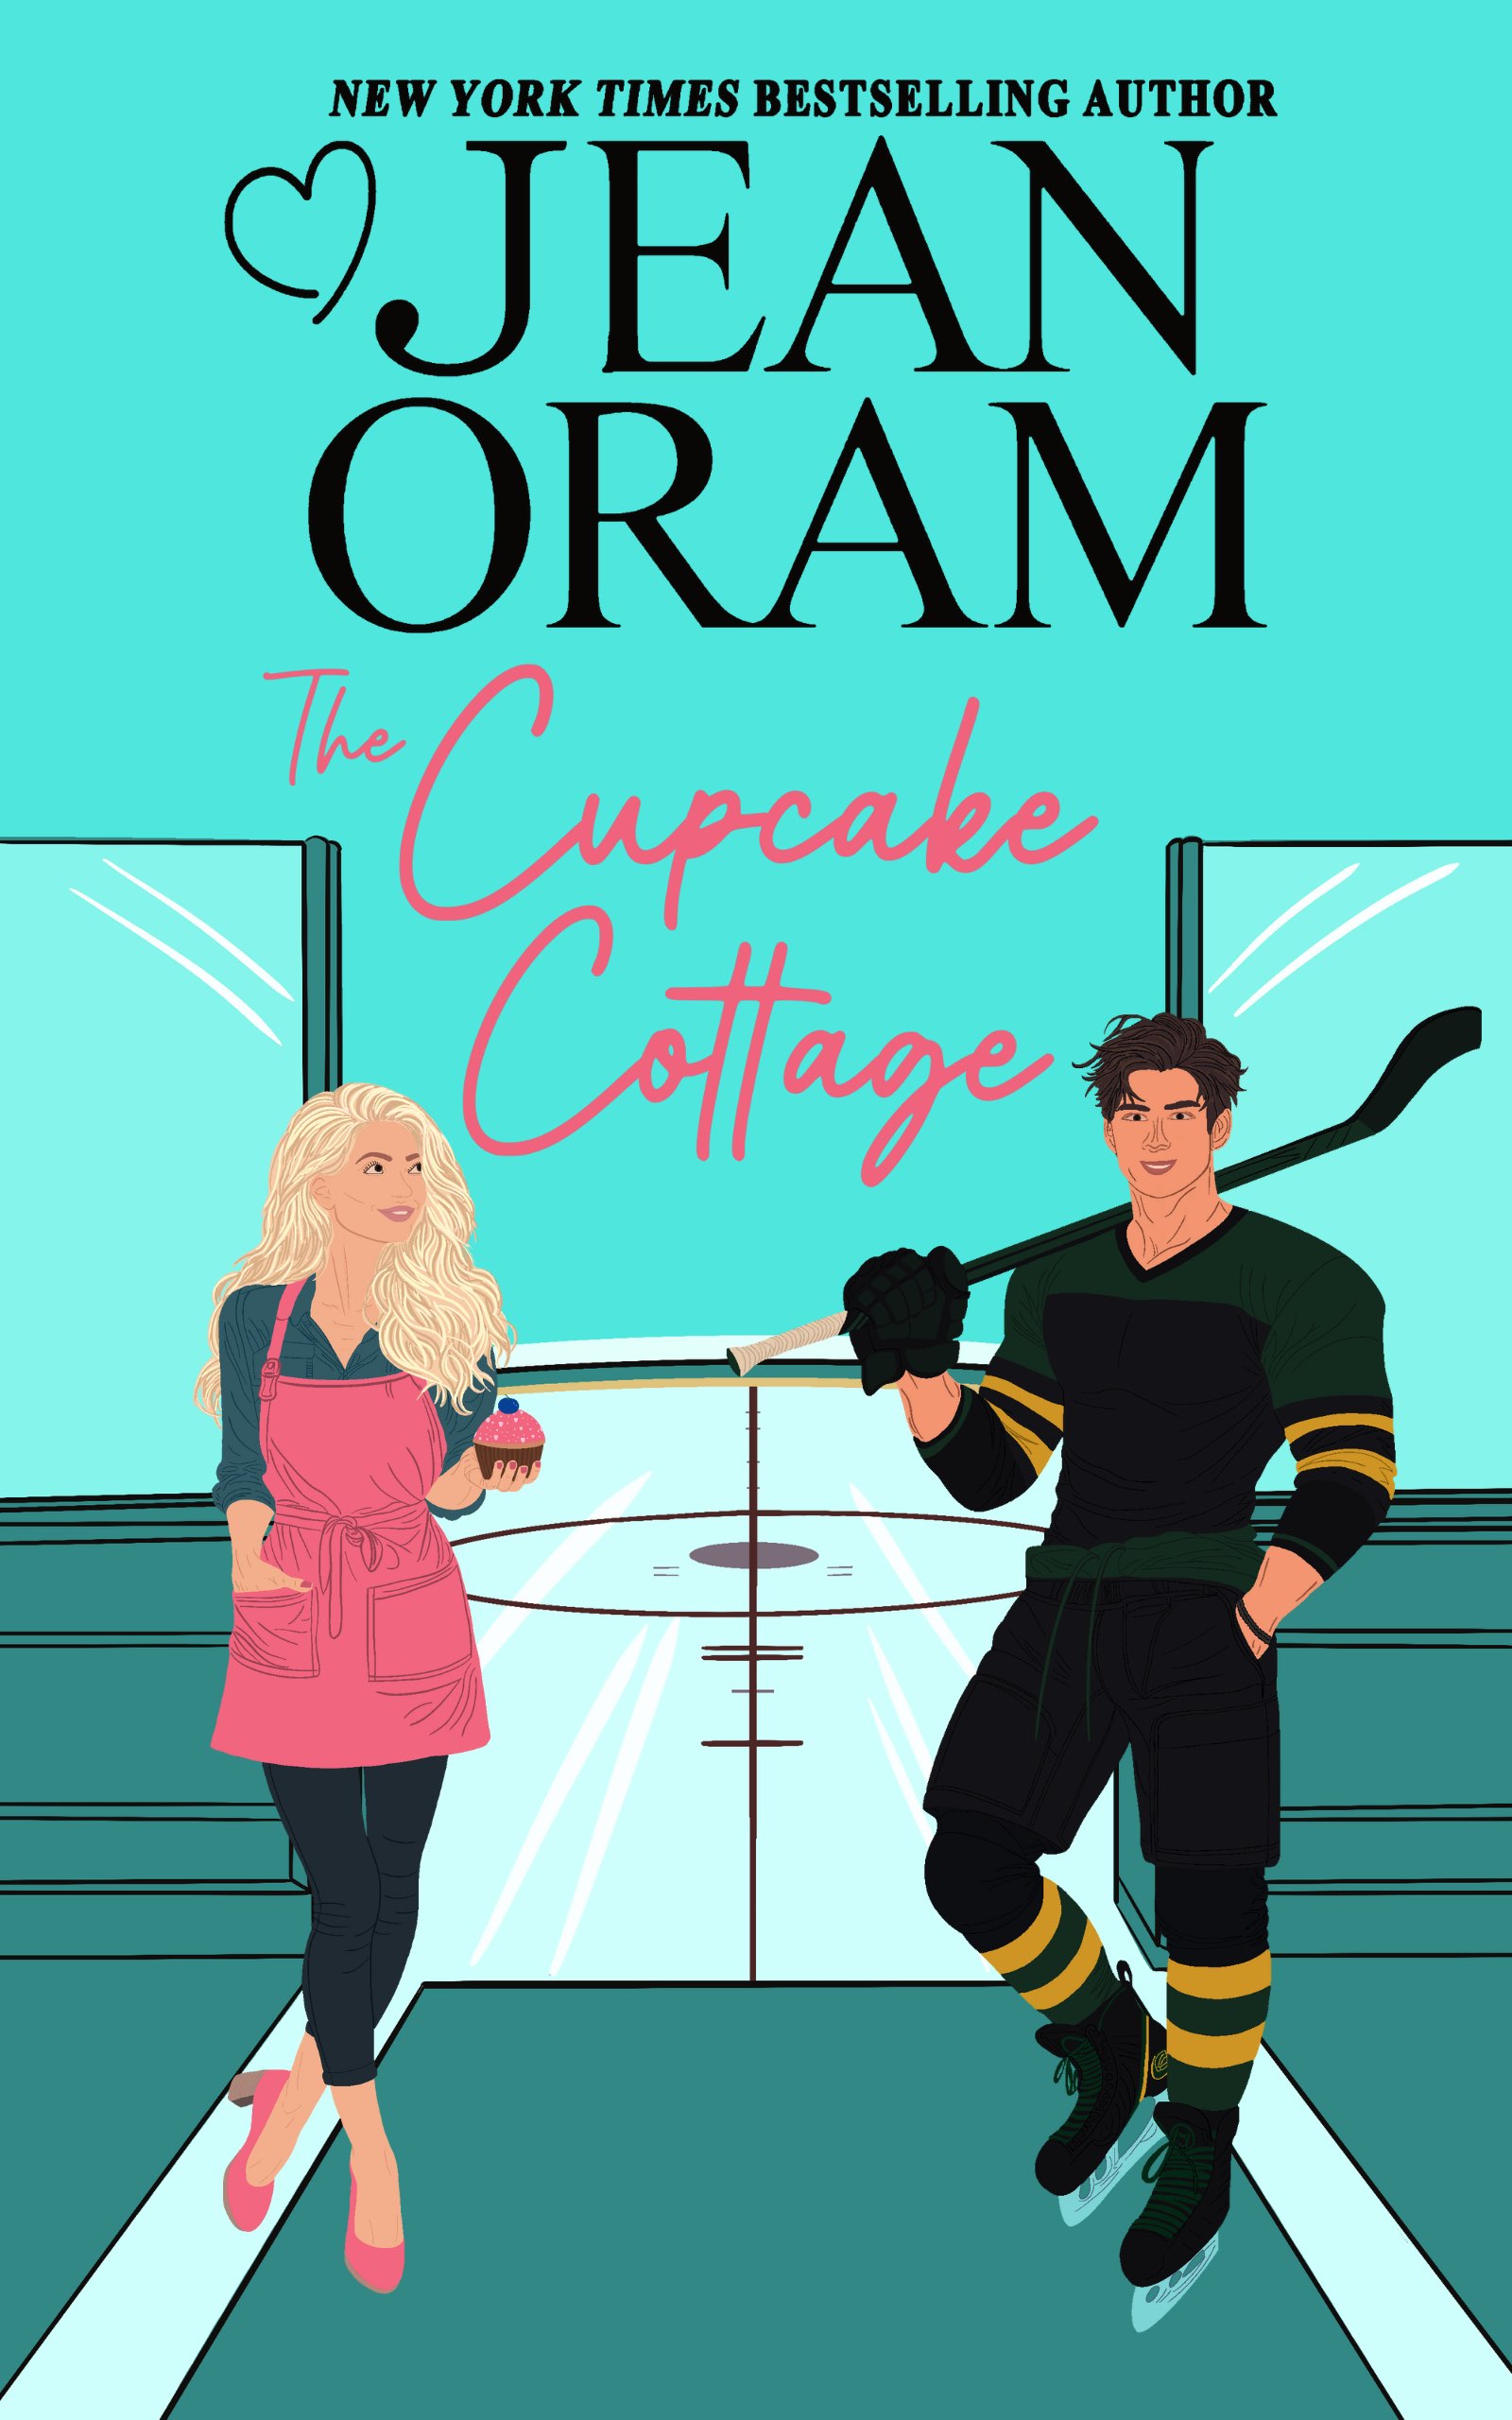 The Cupcake Cottage by Jean Oram. A hockey romance, closed door sweet romance.